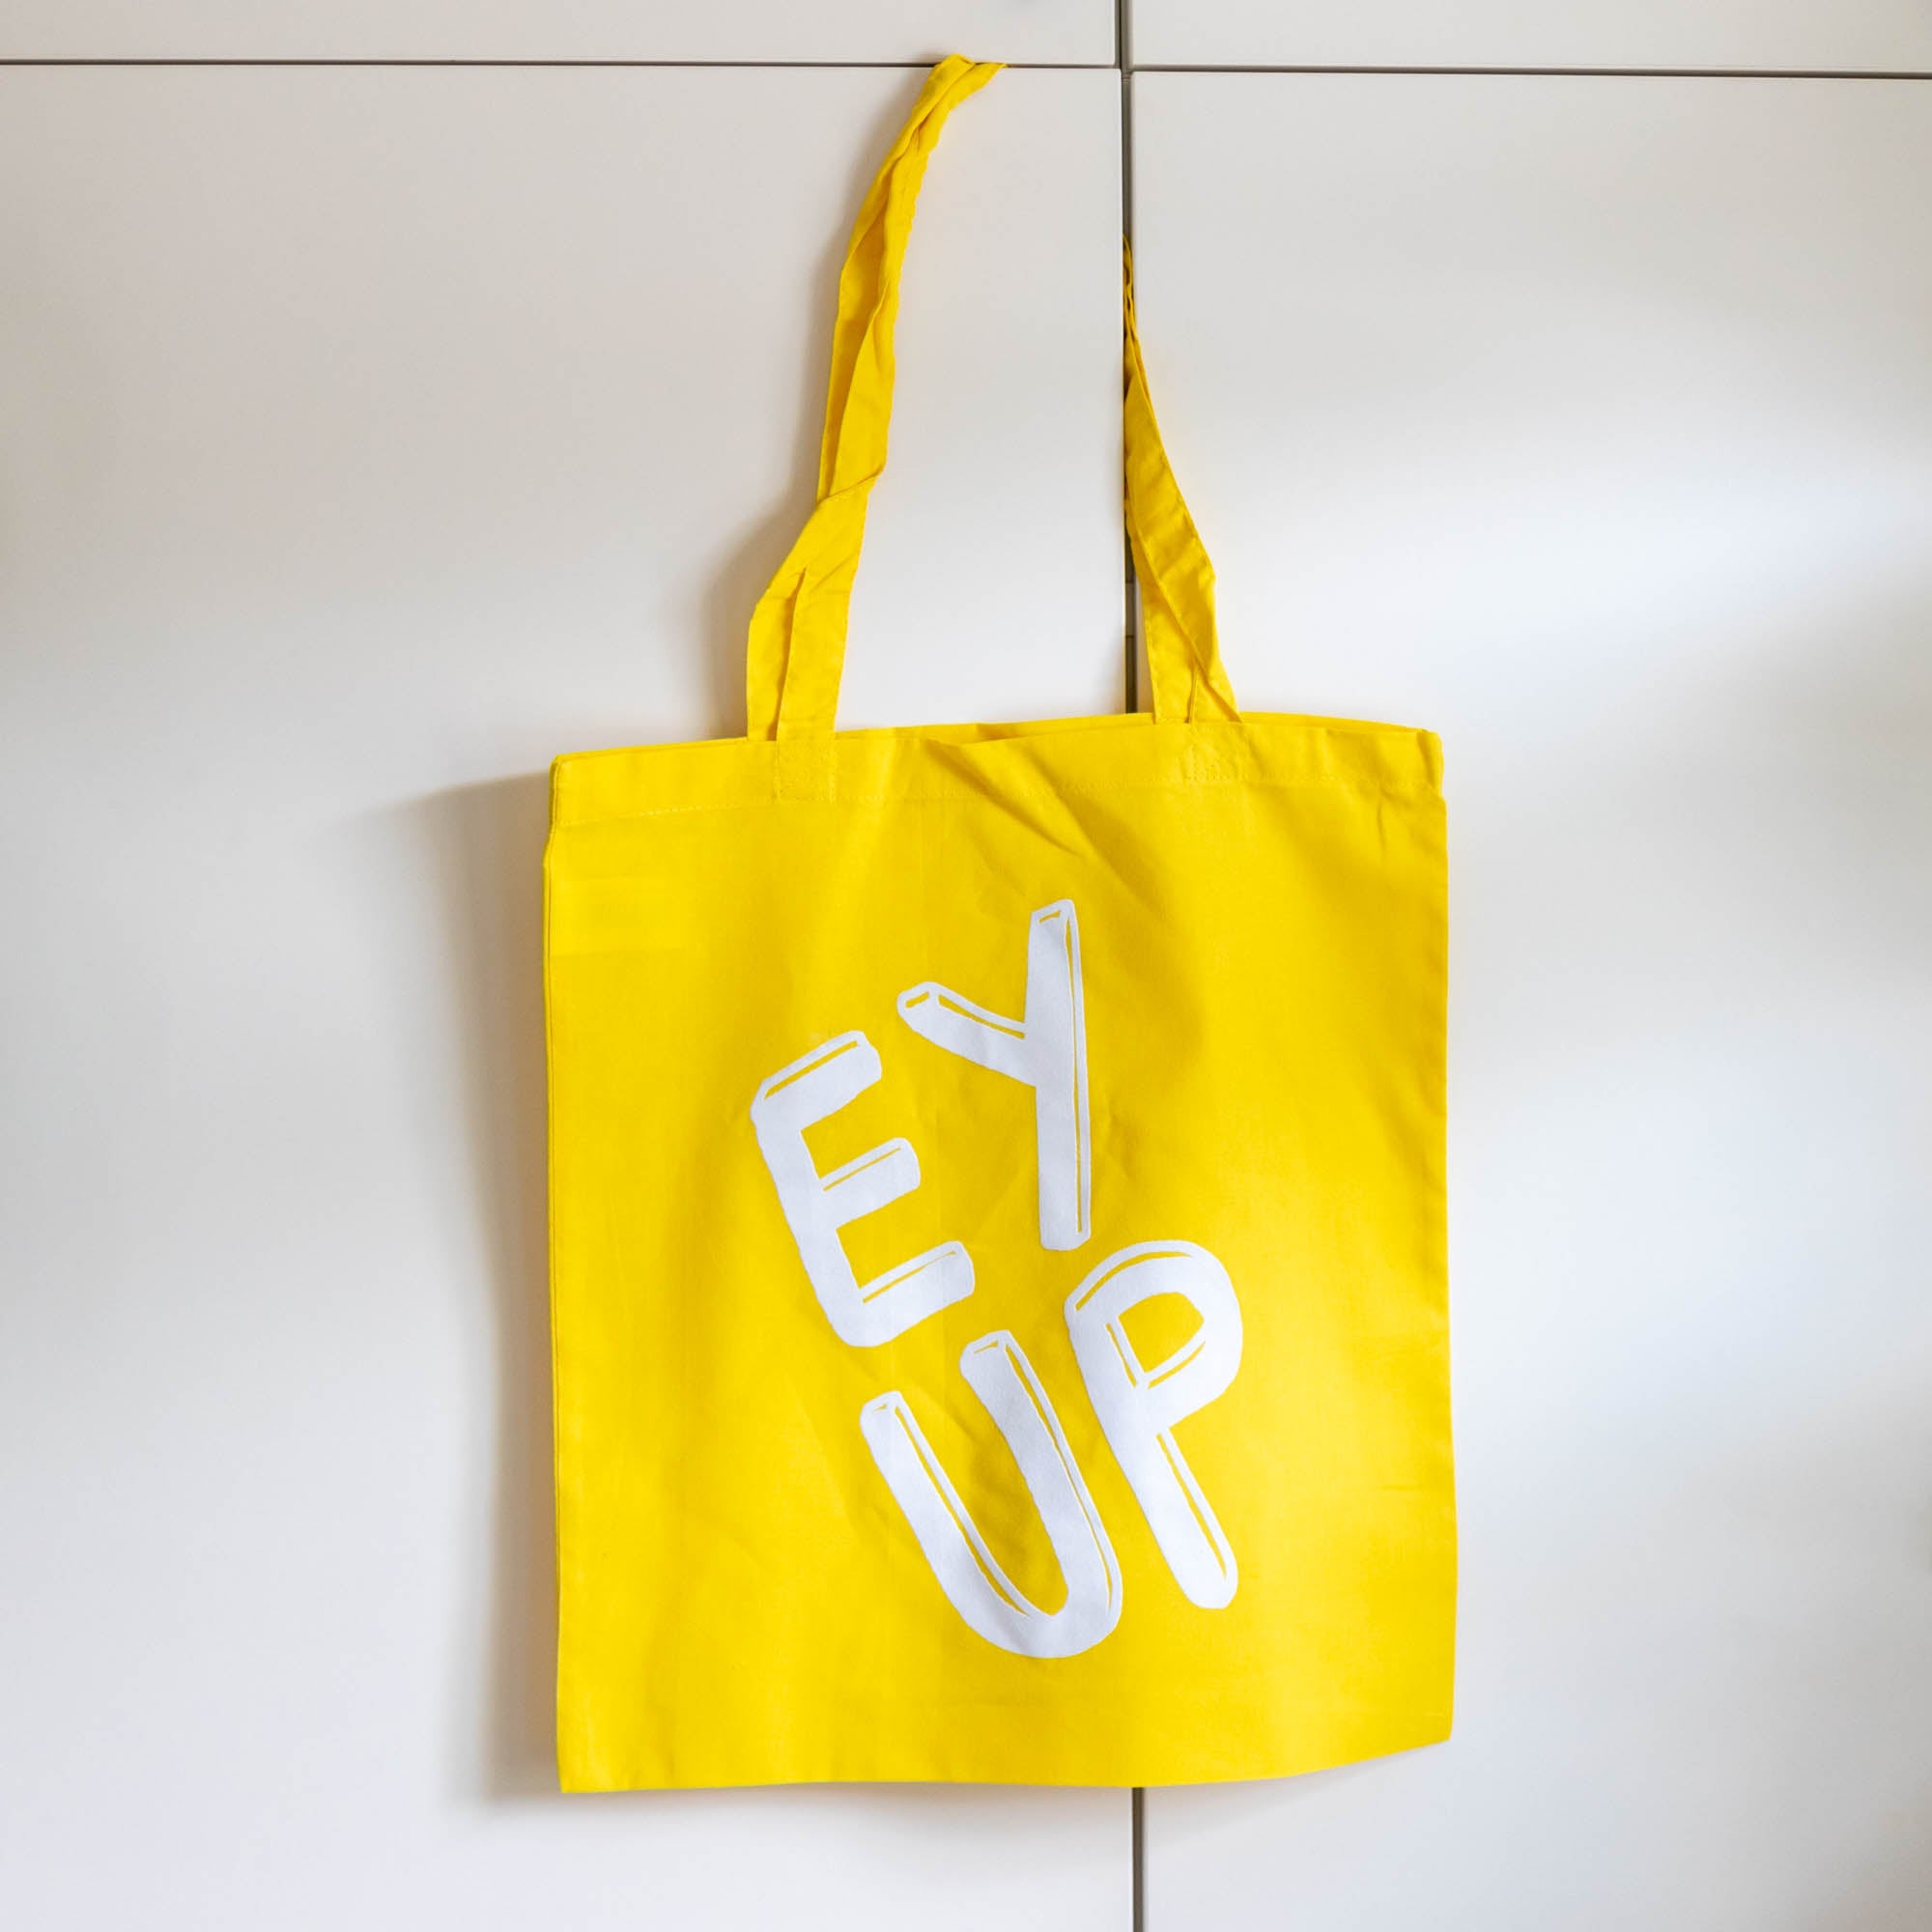 Ey Up Tote Bag - Finest Imaginary